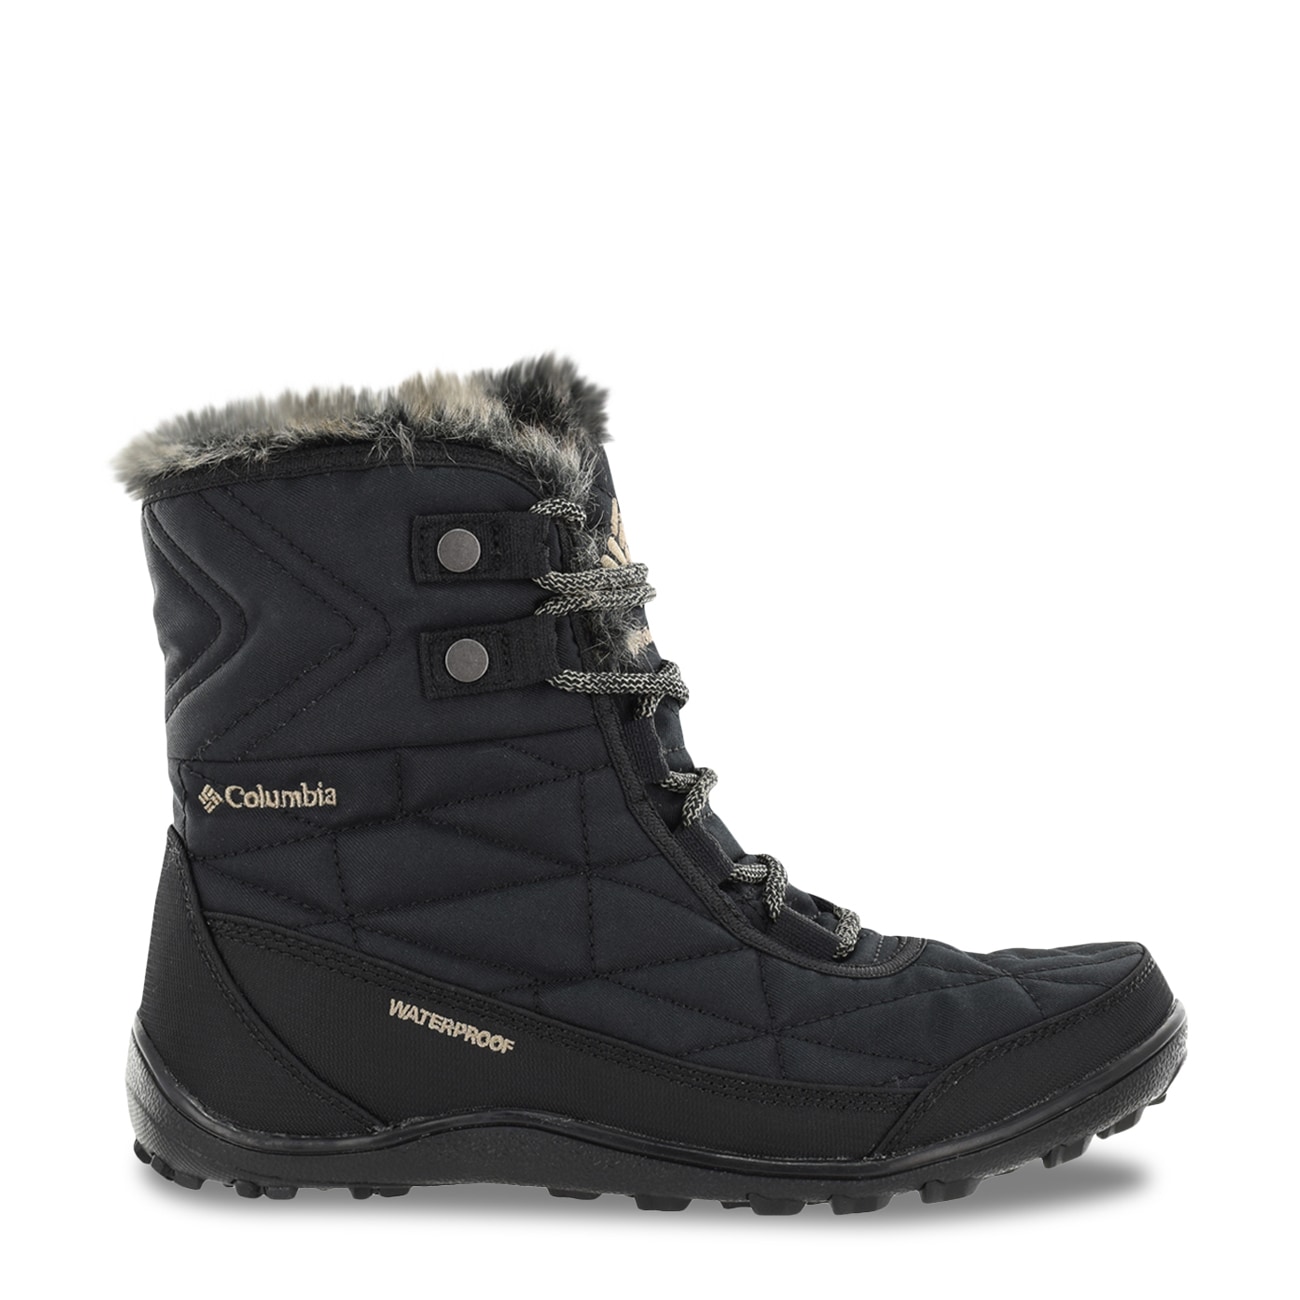 columbia women's snow boots clearance